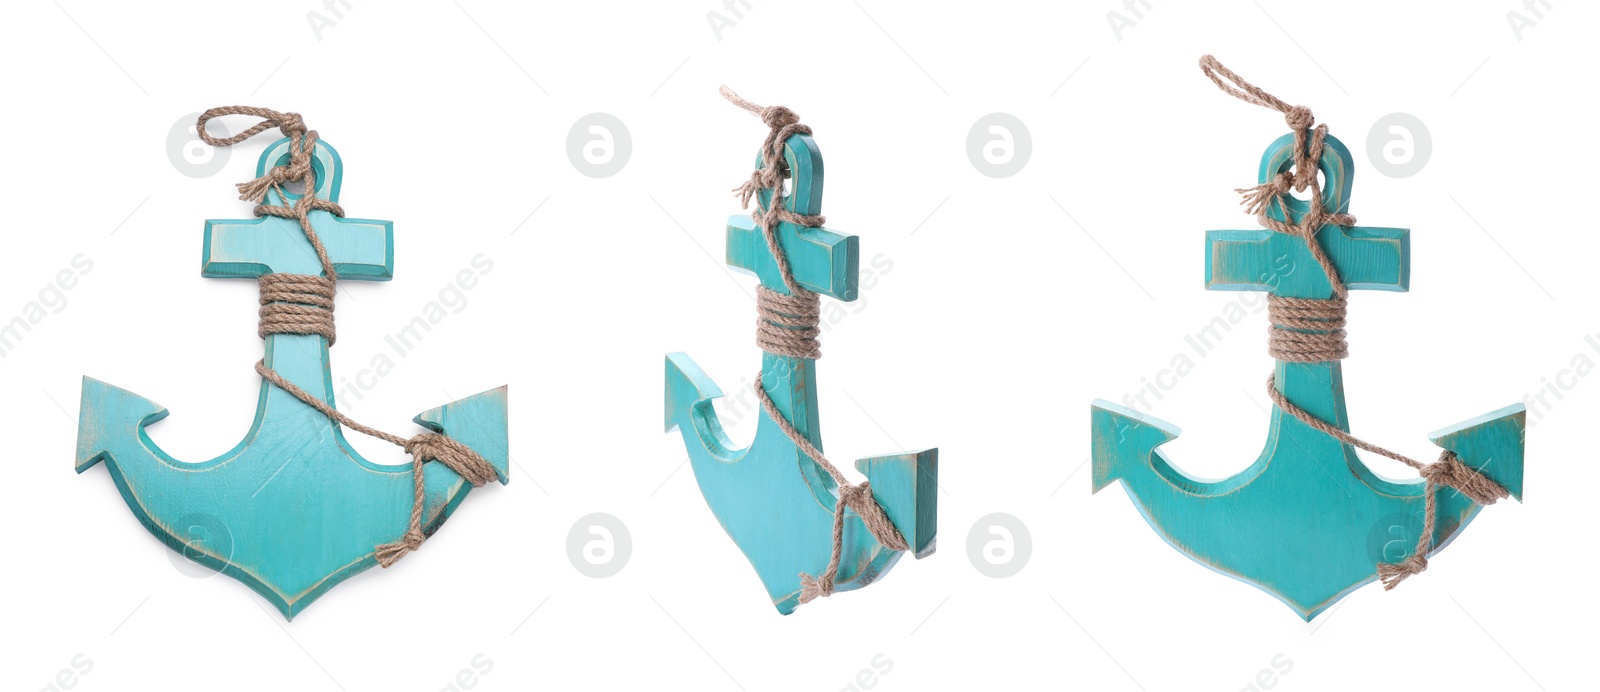 Image of Collage with anchor isolated on white, different angles